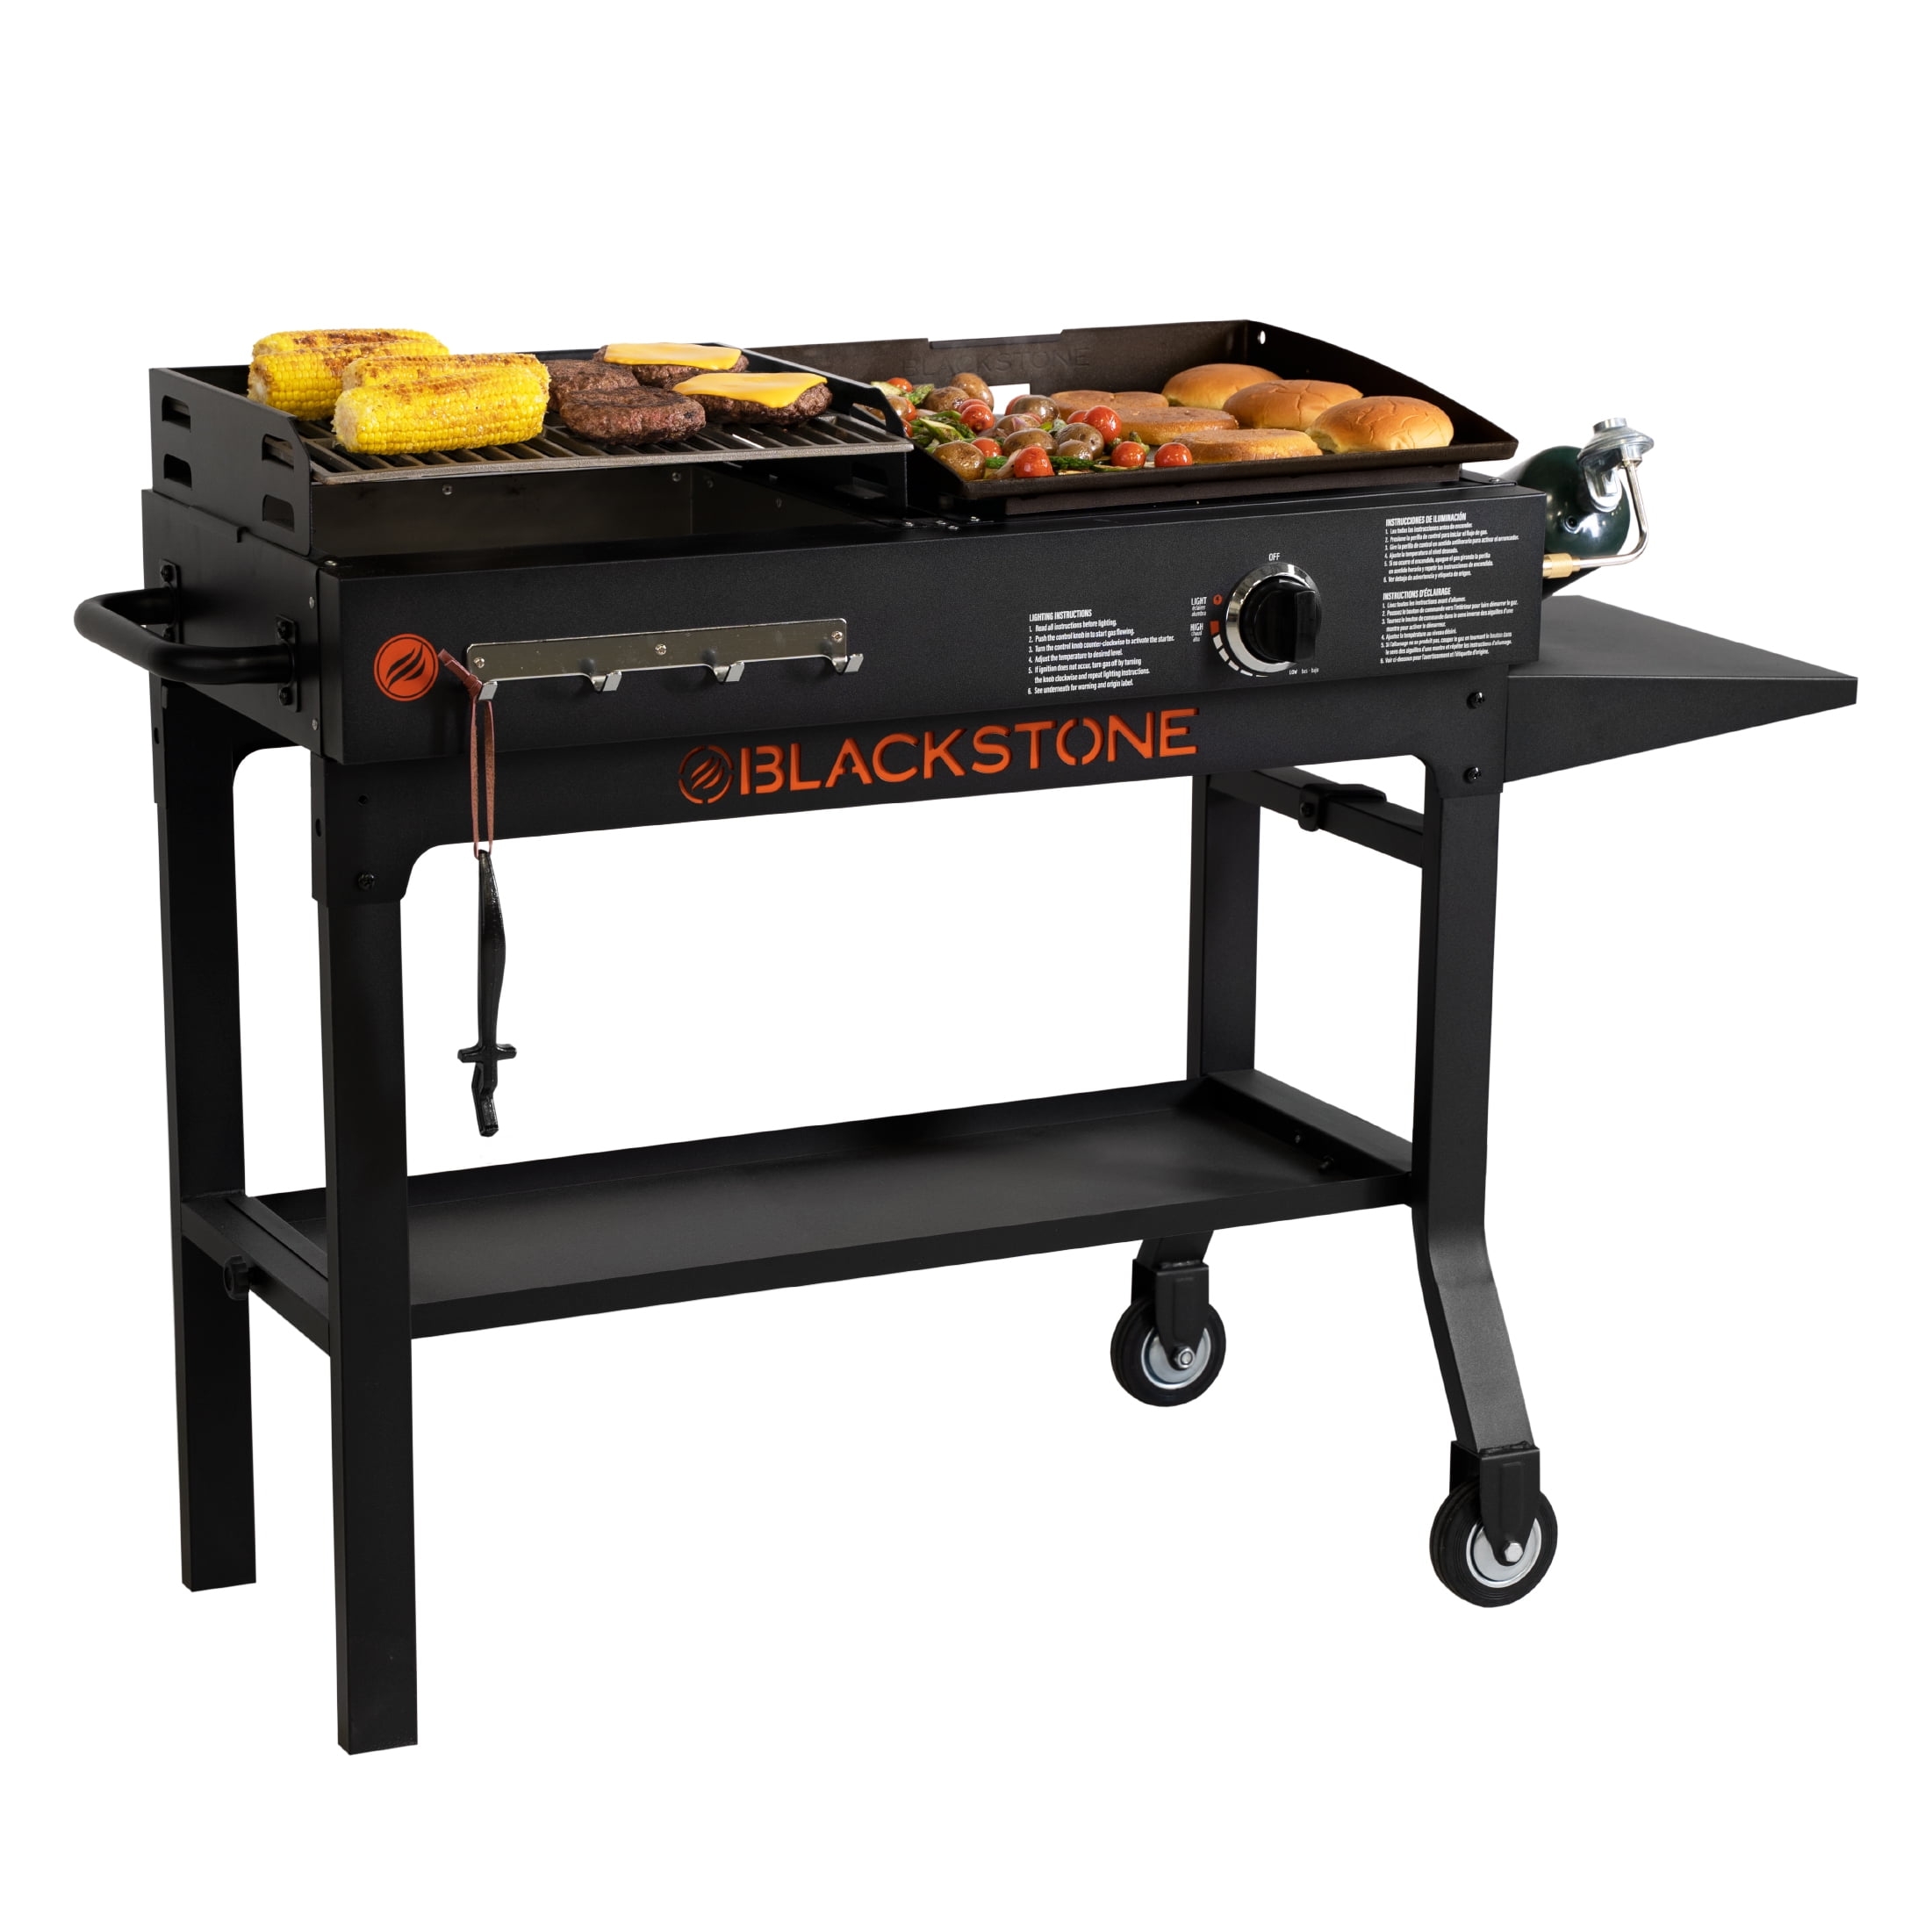 Blackstone Duo 17″ Griddle and Charcoal Grill Combo